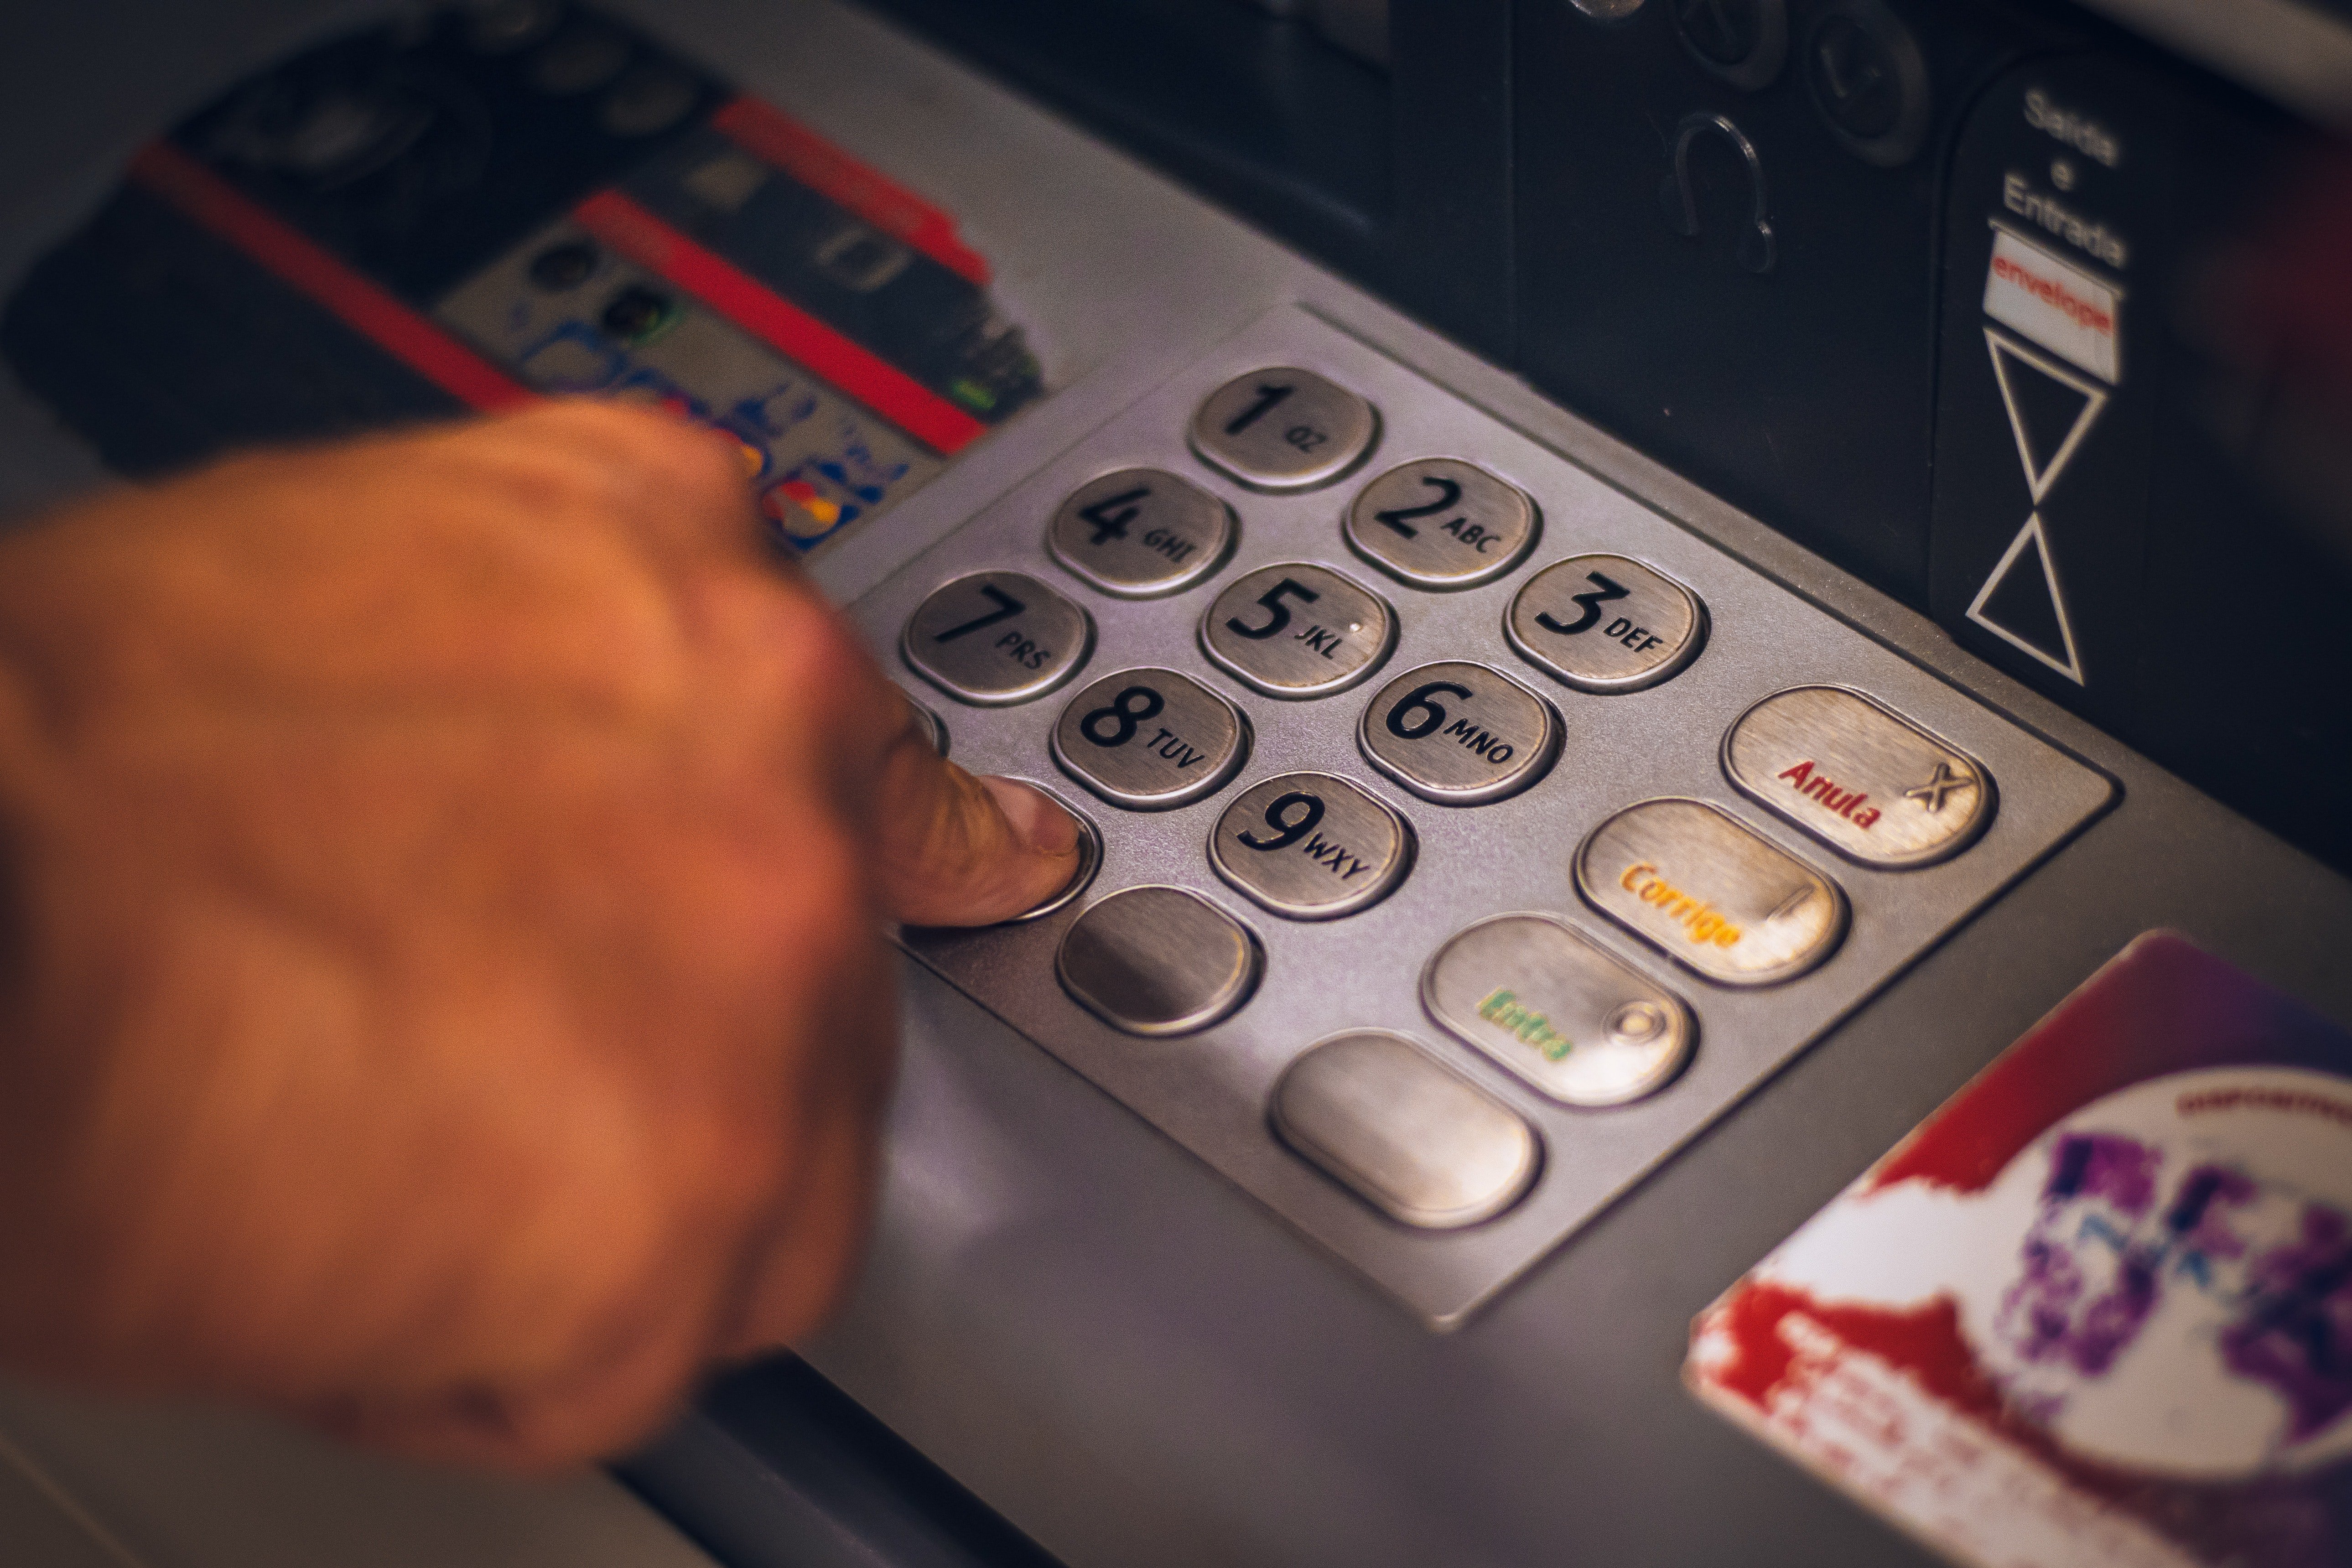 A customer withdrawing money at an ATM | Source: Pexels